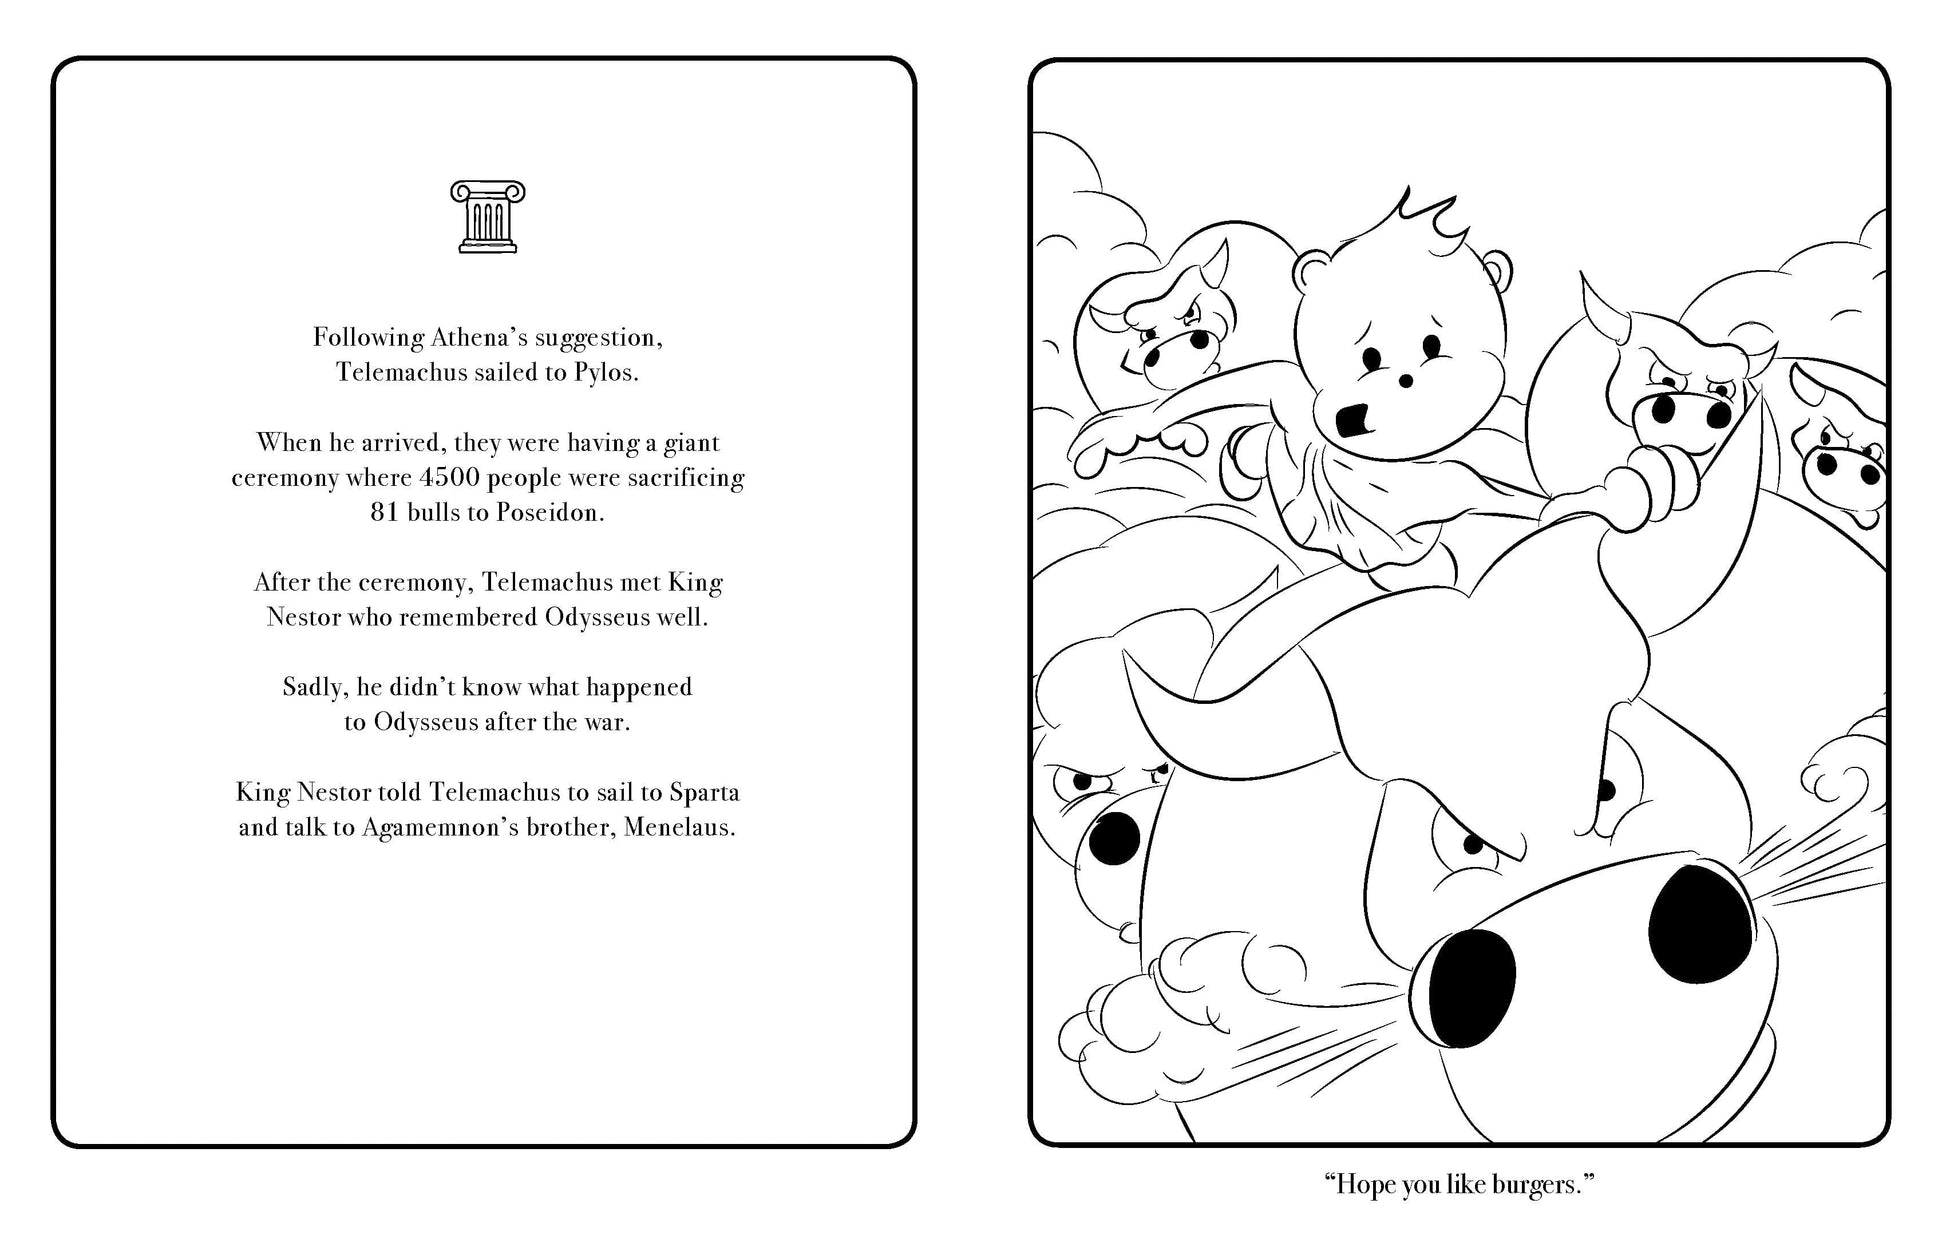 Danger Bear's Odyssey: An Illustrated Classic Coloring Book Danger Bear Industries 